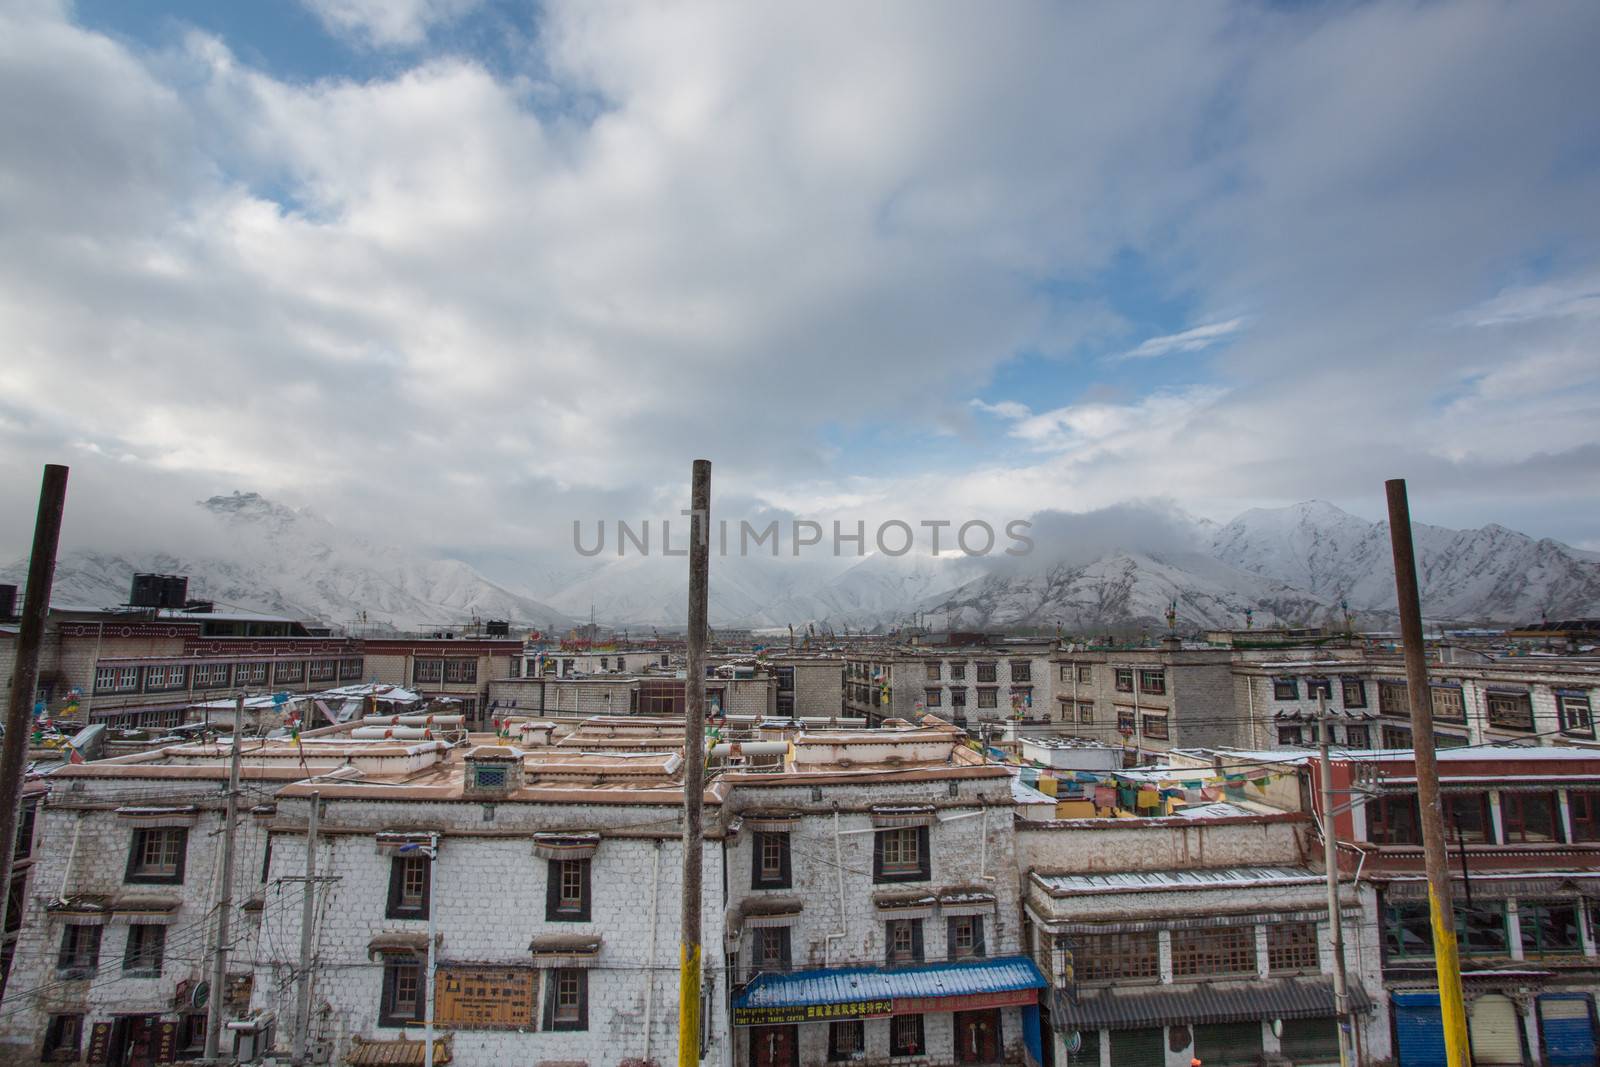 Rooftops in Lhasa and the snowy moutains early in the in the background. Tibet 2013.